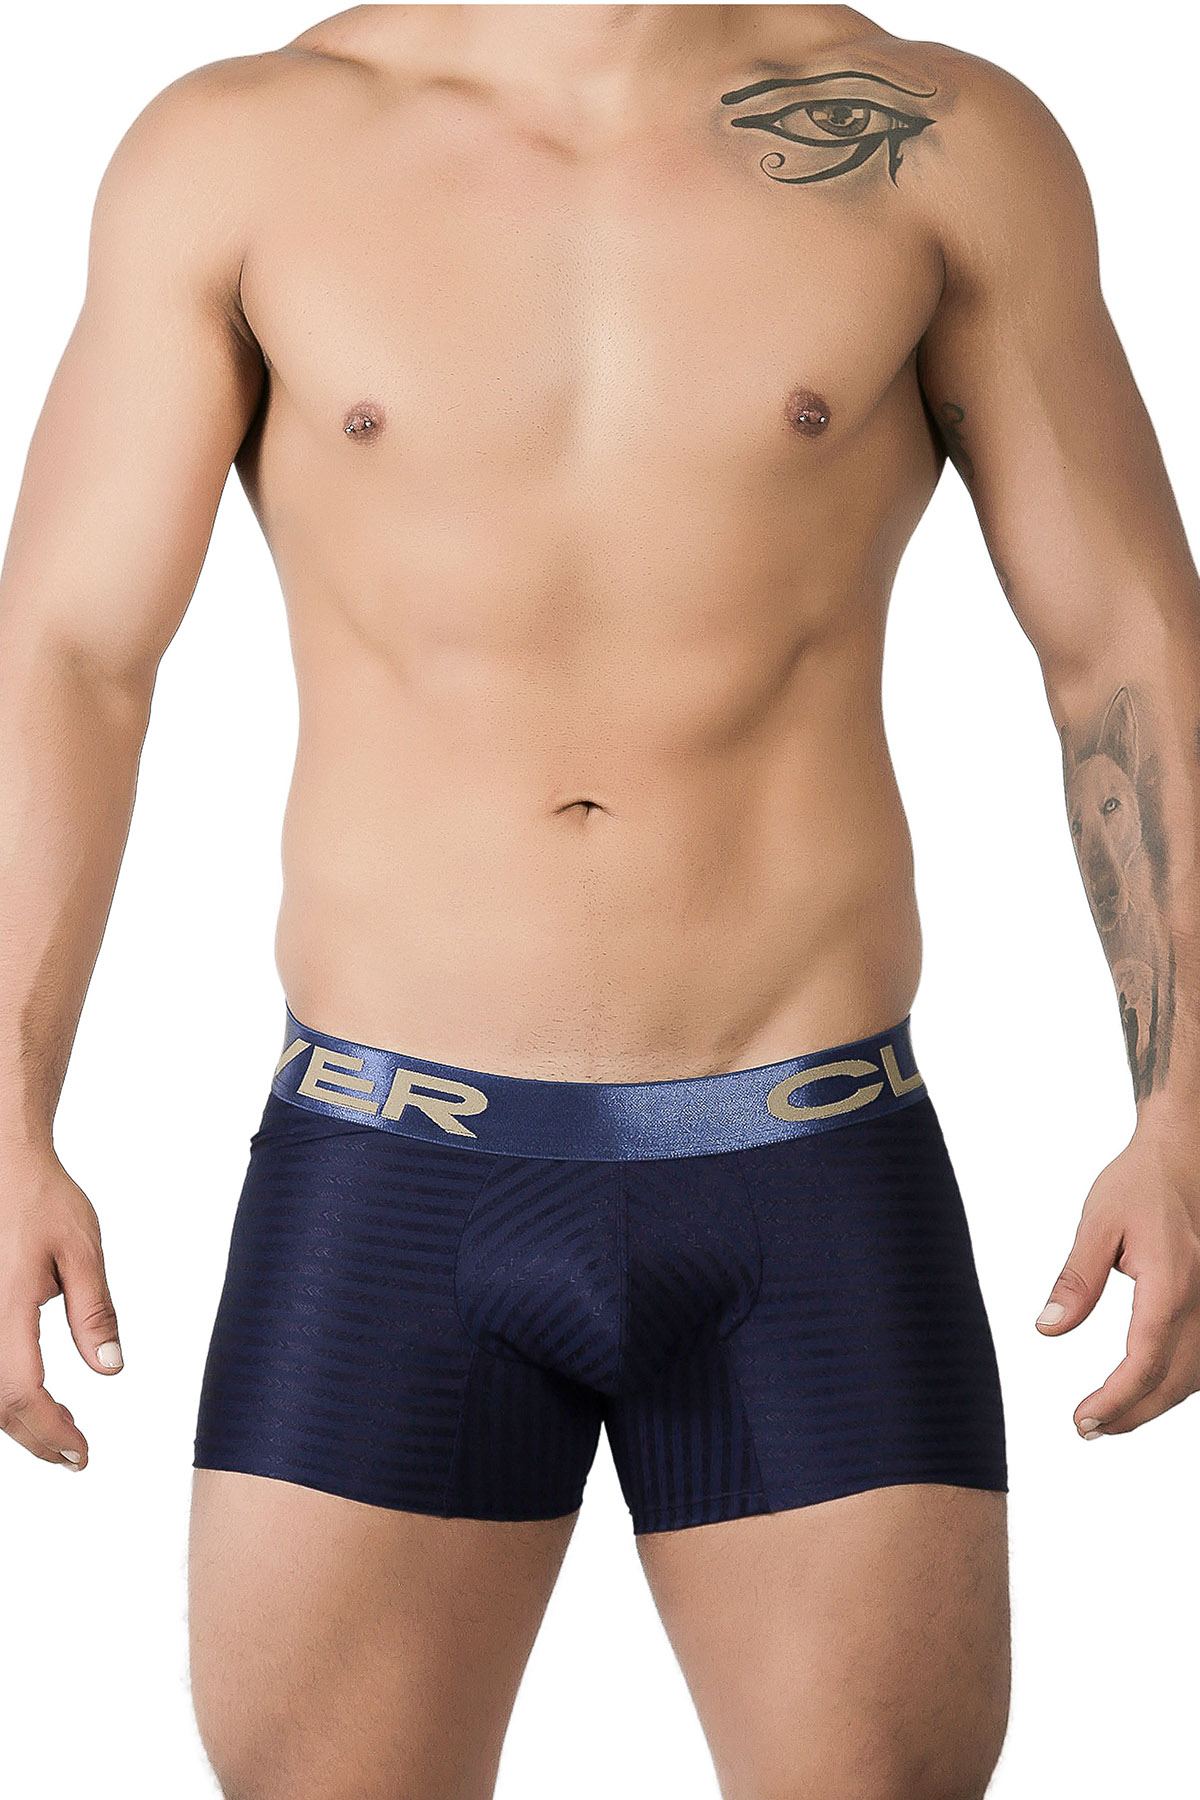 Clever Limited Edition Dark Blue Trunk 219922